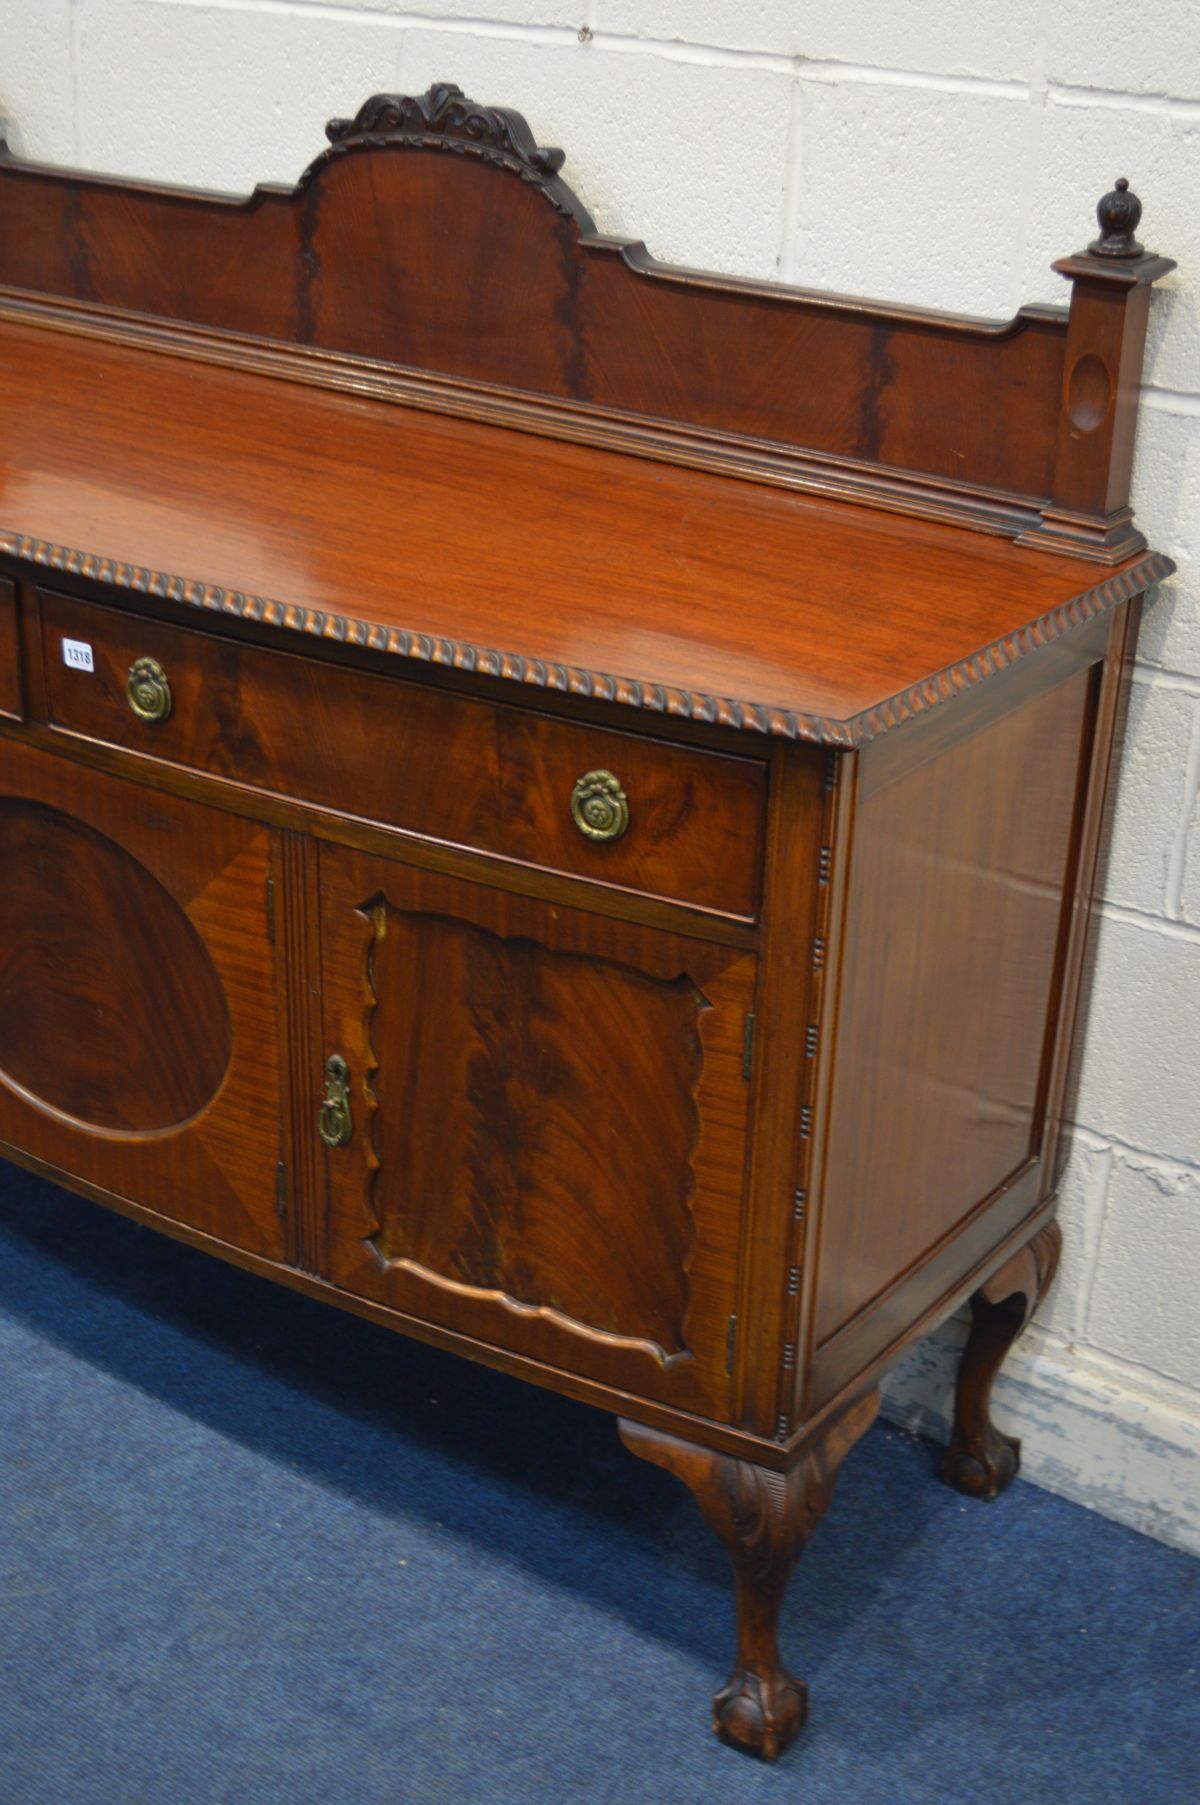 A 20TH CENTURY MAHOGANY BOWFRONT SIDEBOARD, with a shaped raised back, rope detail to the top - Image 2 of 4